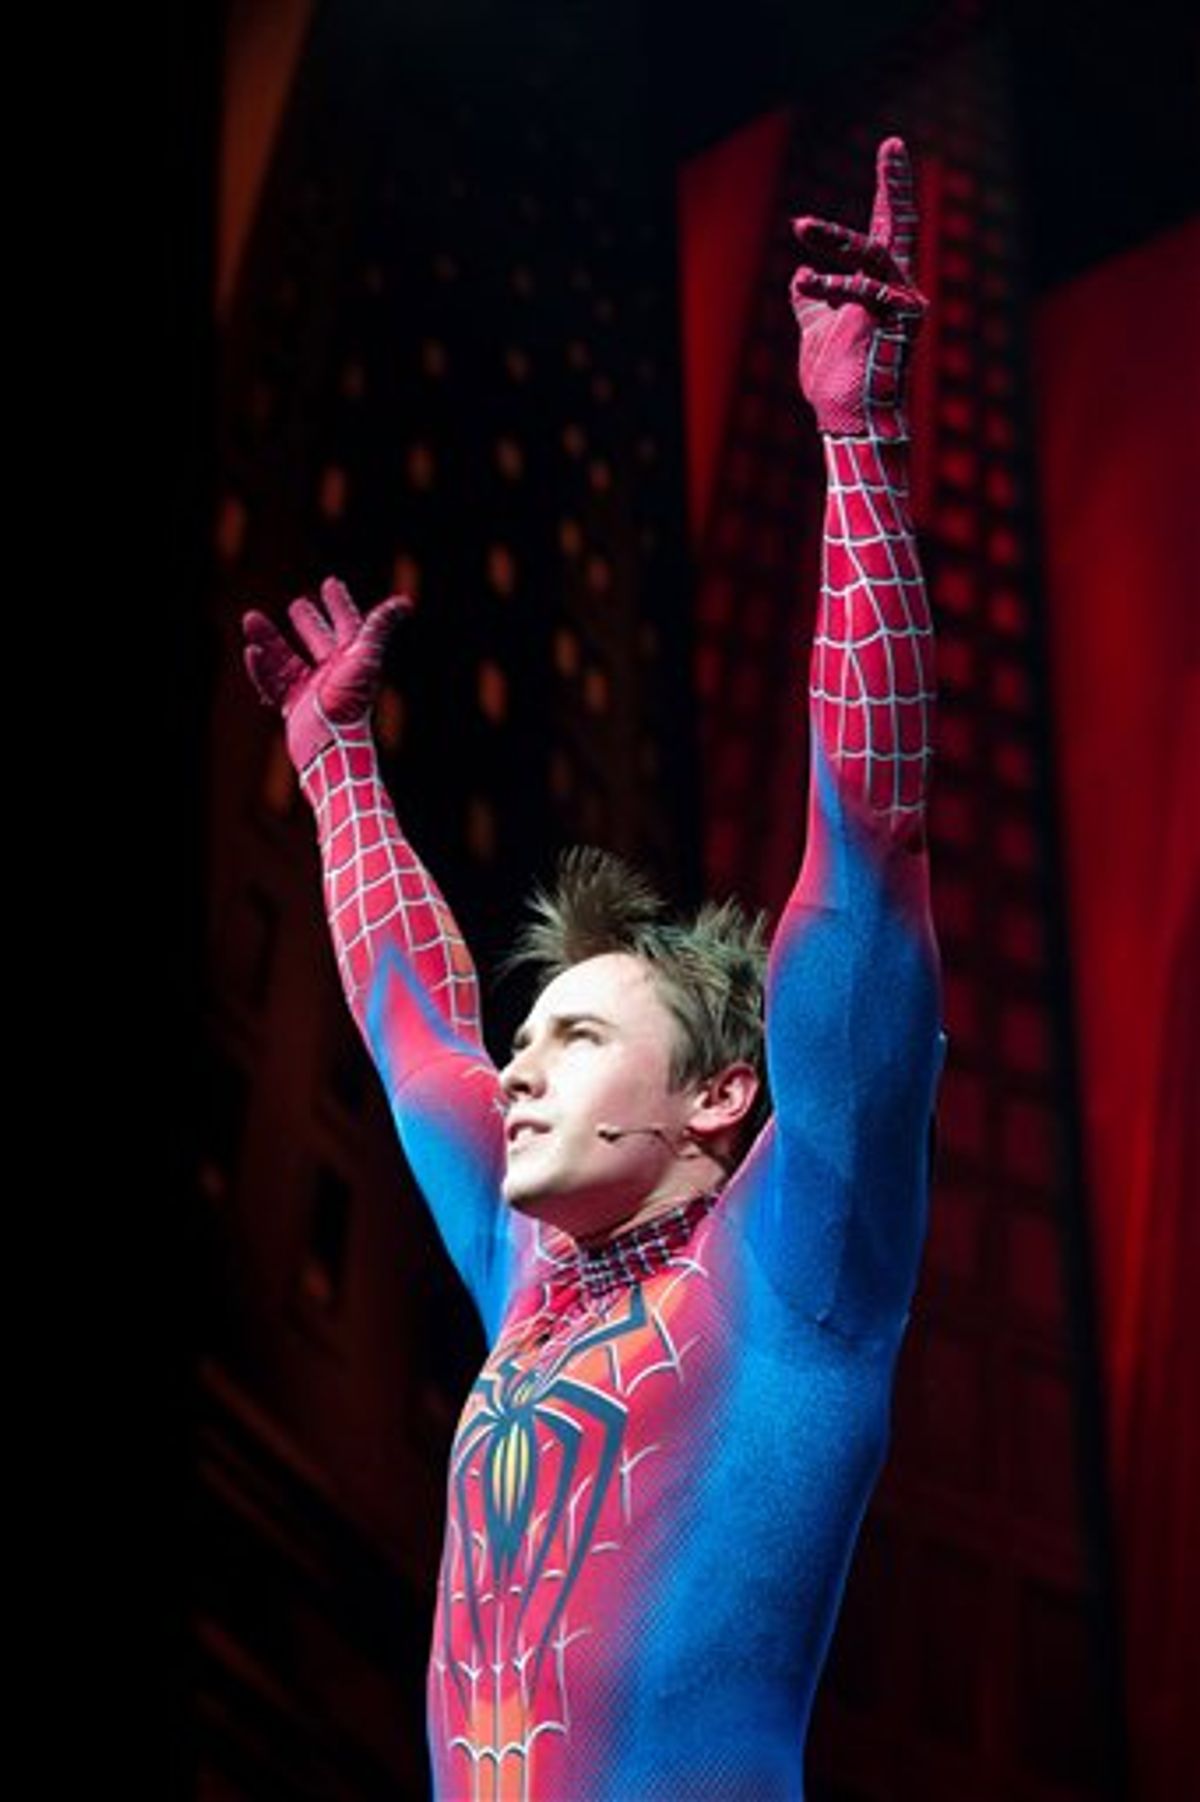 Reeve Carney appears onstage at the curtain call for the opening night performance of the Broadway musical Spider-Man Turn Off the Dark in New York, Tuesday, June 14, 2011. (AP Photo/Charles Sykes)  (AP)